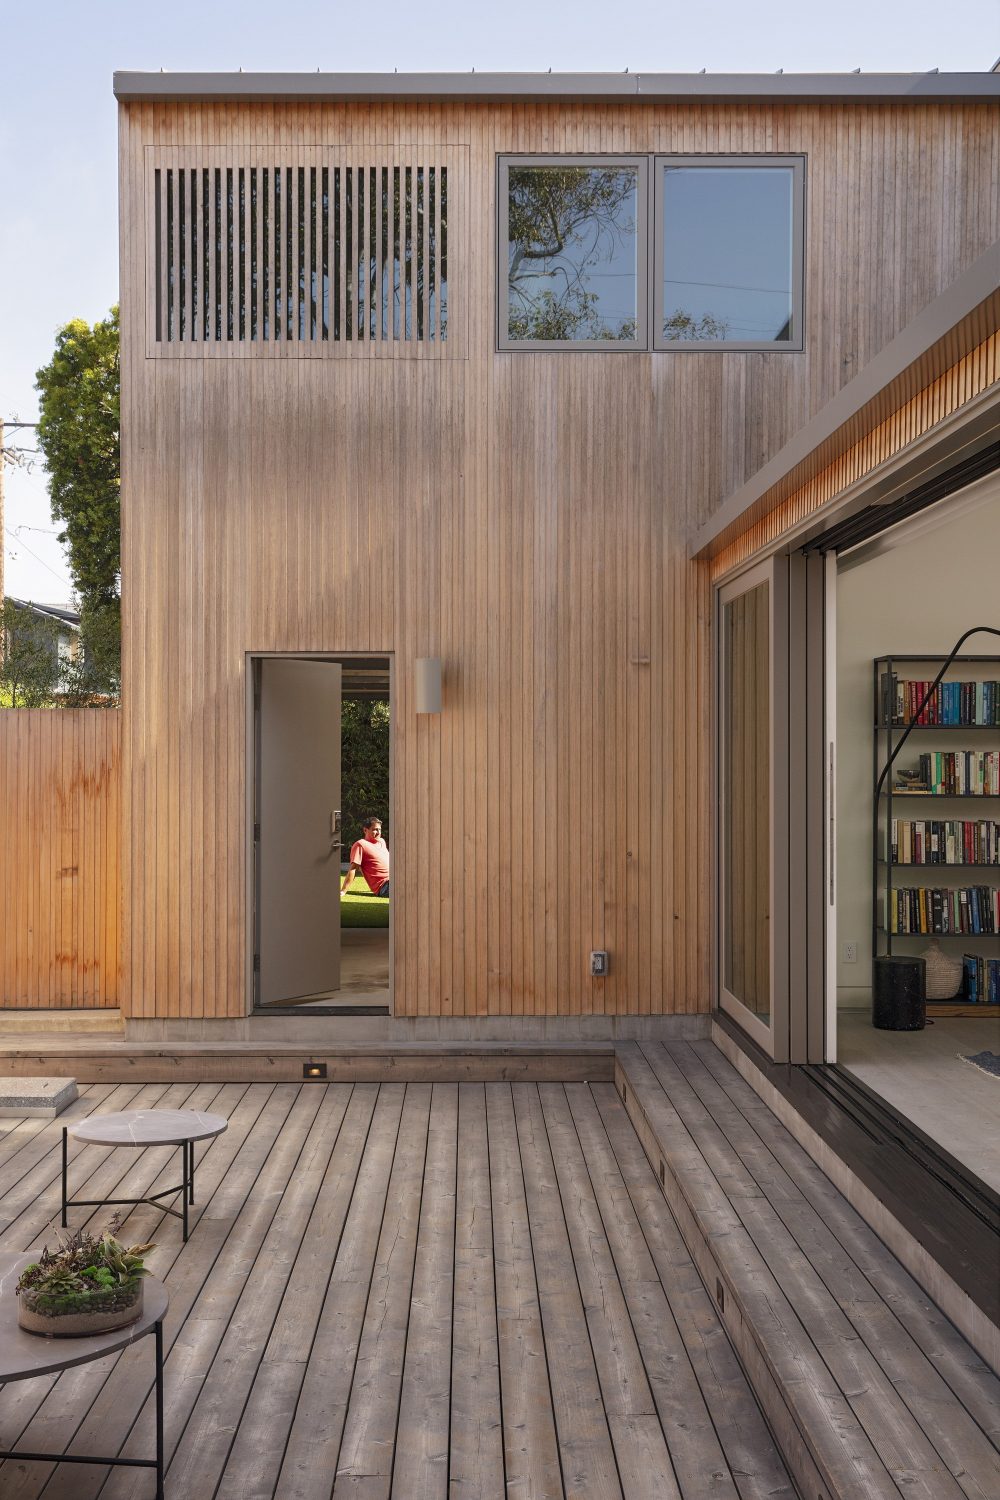 30th Street House by Blue Truck Studio